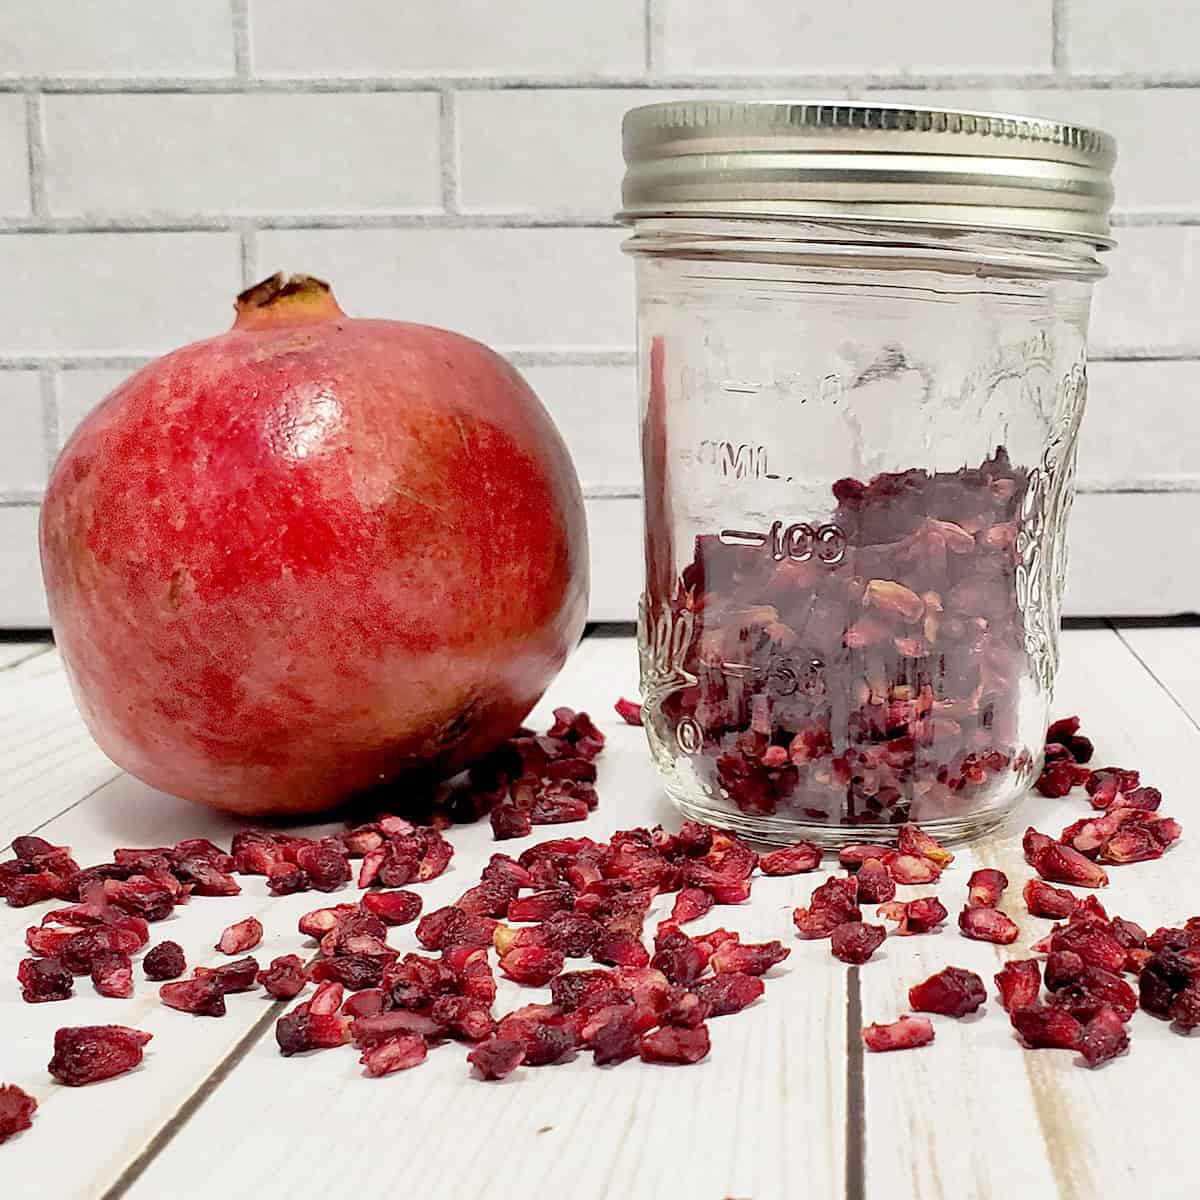 How To Store Whole Pomegranate